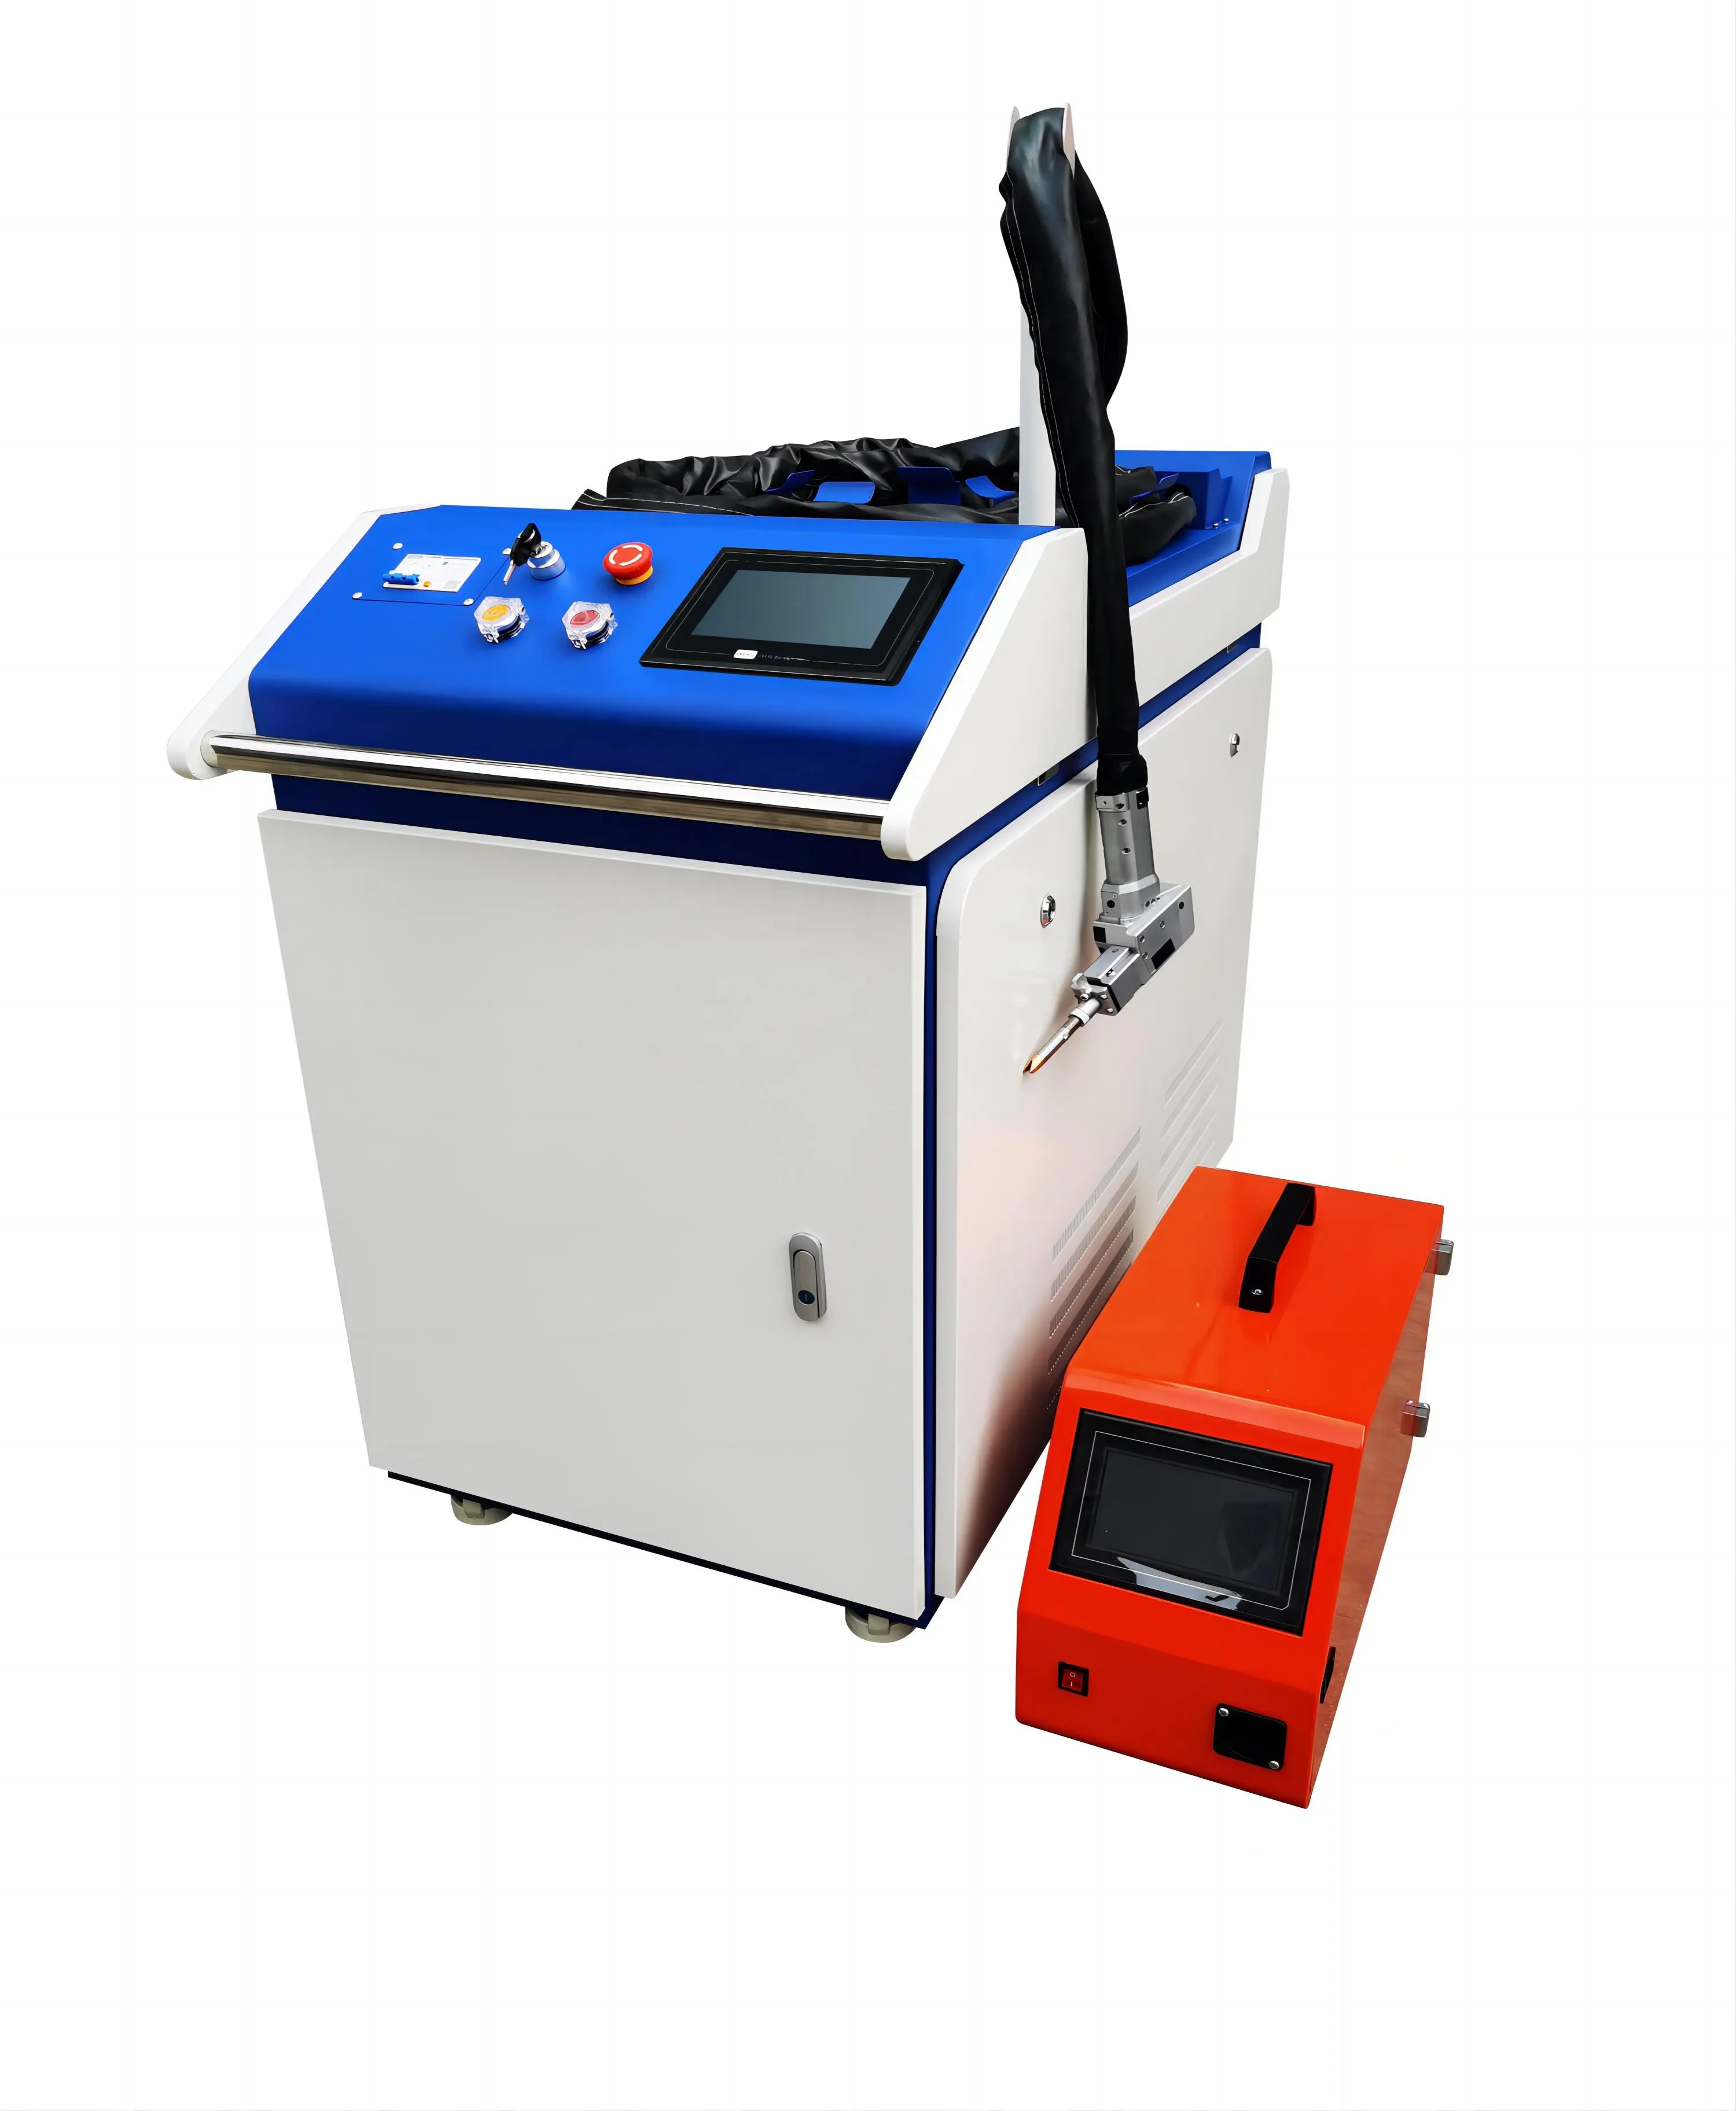 The popular hand-held laser welder in China comes with a CE certified laser cleaning and cutting 3-in-1 welder